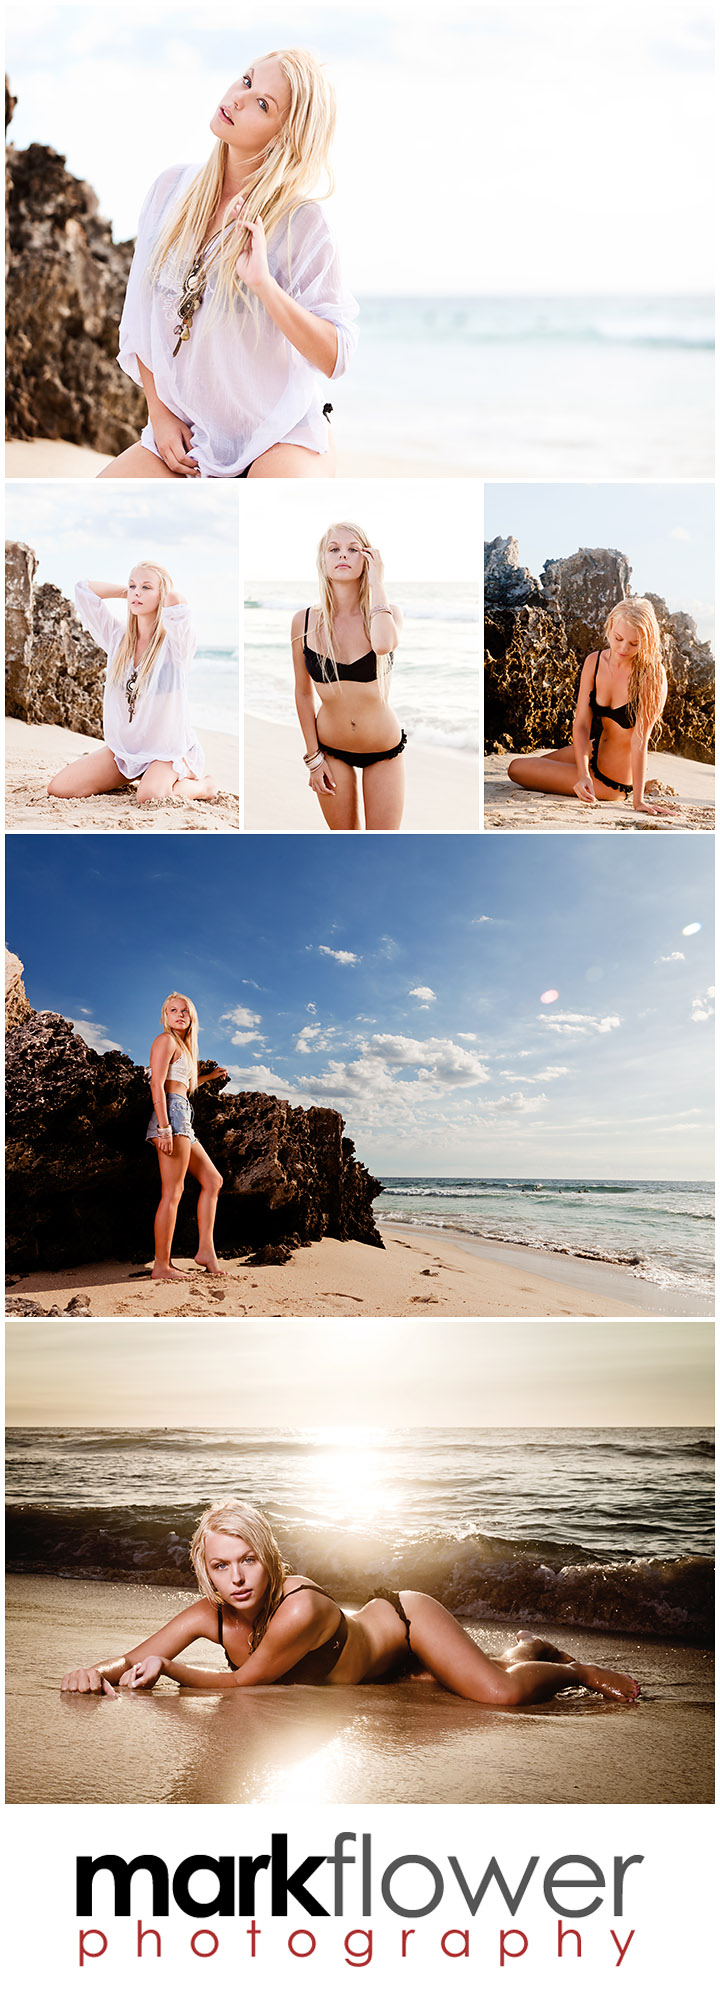 Male and Female model photo shoot of Mark Flower and Megan Louise Ryan in Beach